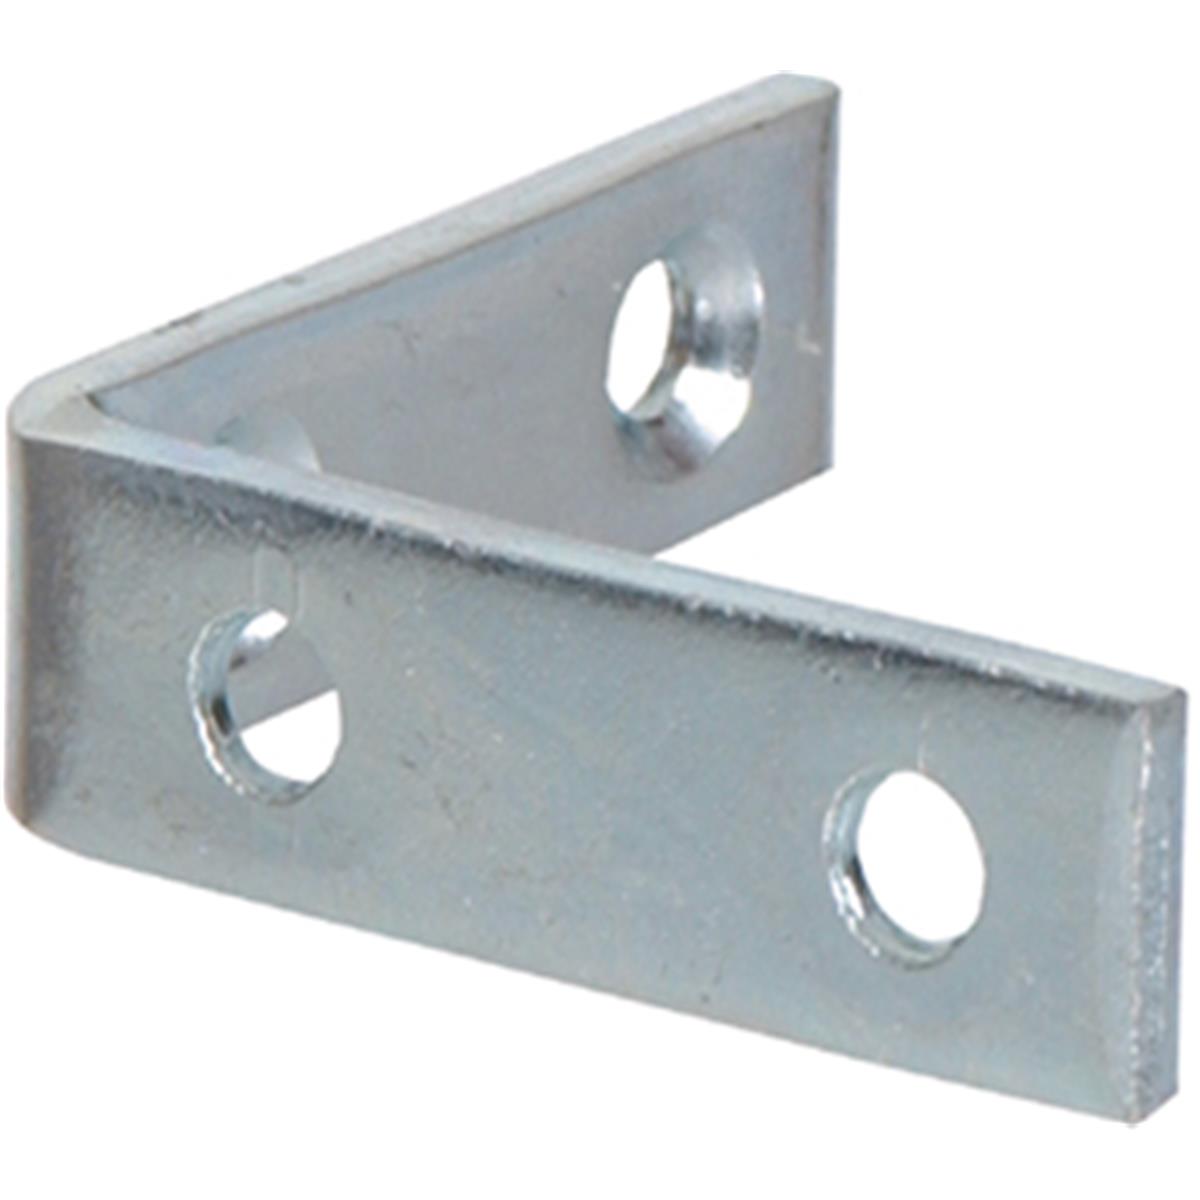 UPC 008236862577 product image for 851129 3.5 x 0.75 in. Zinc Plated Corner Brace, Pack of 5 | upcitemdb.com